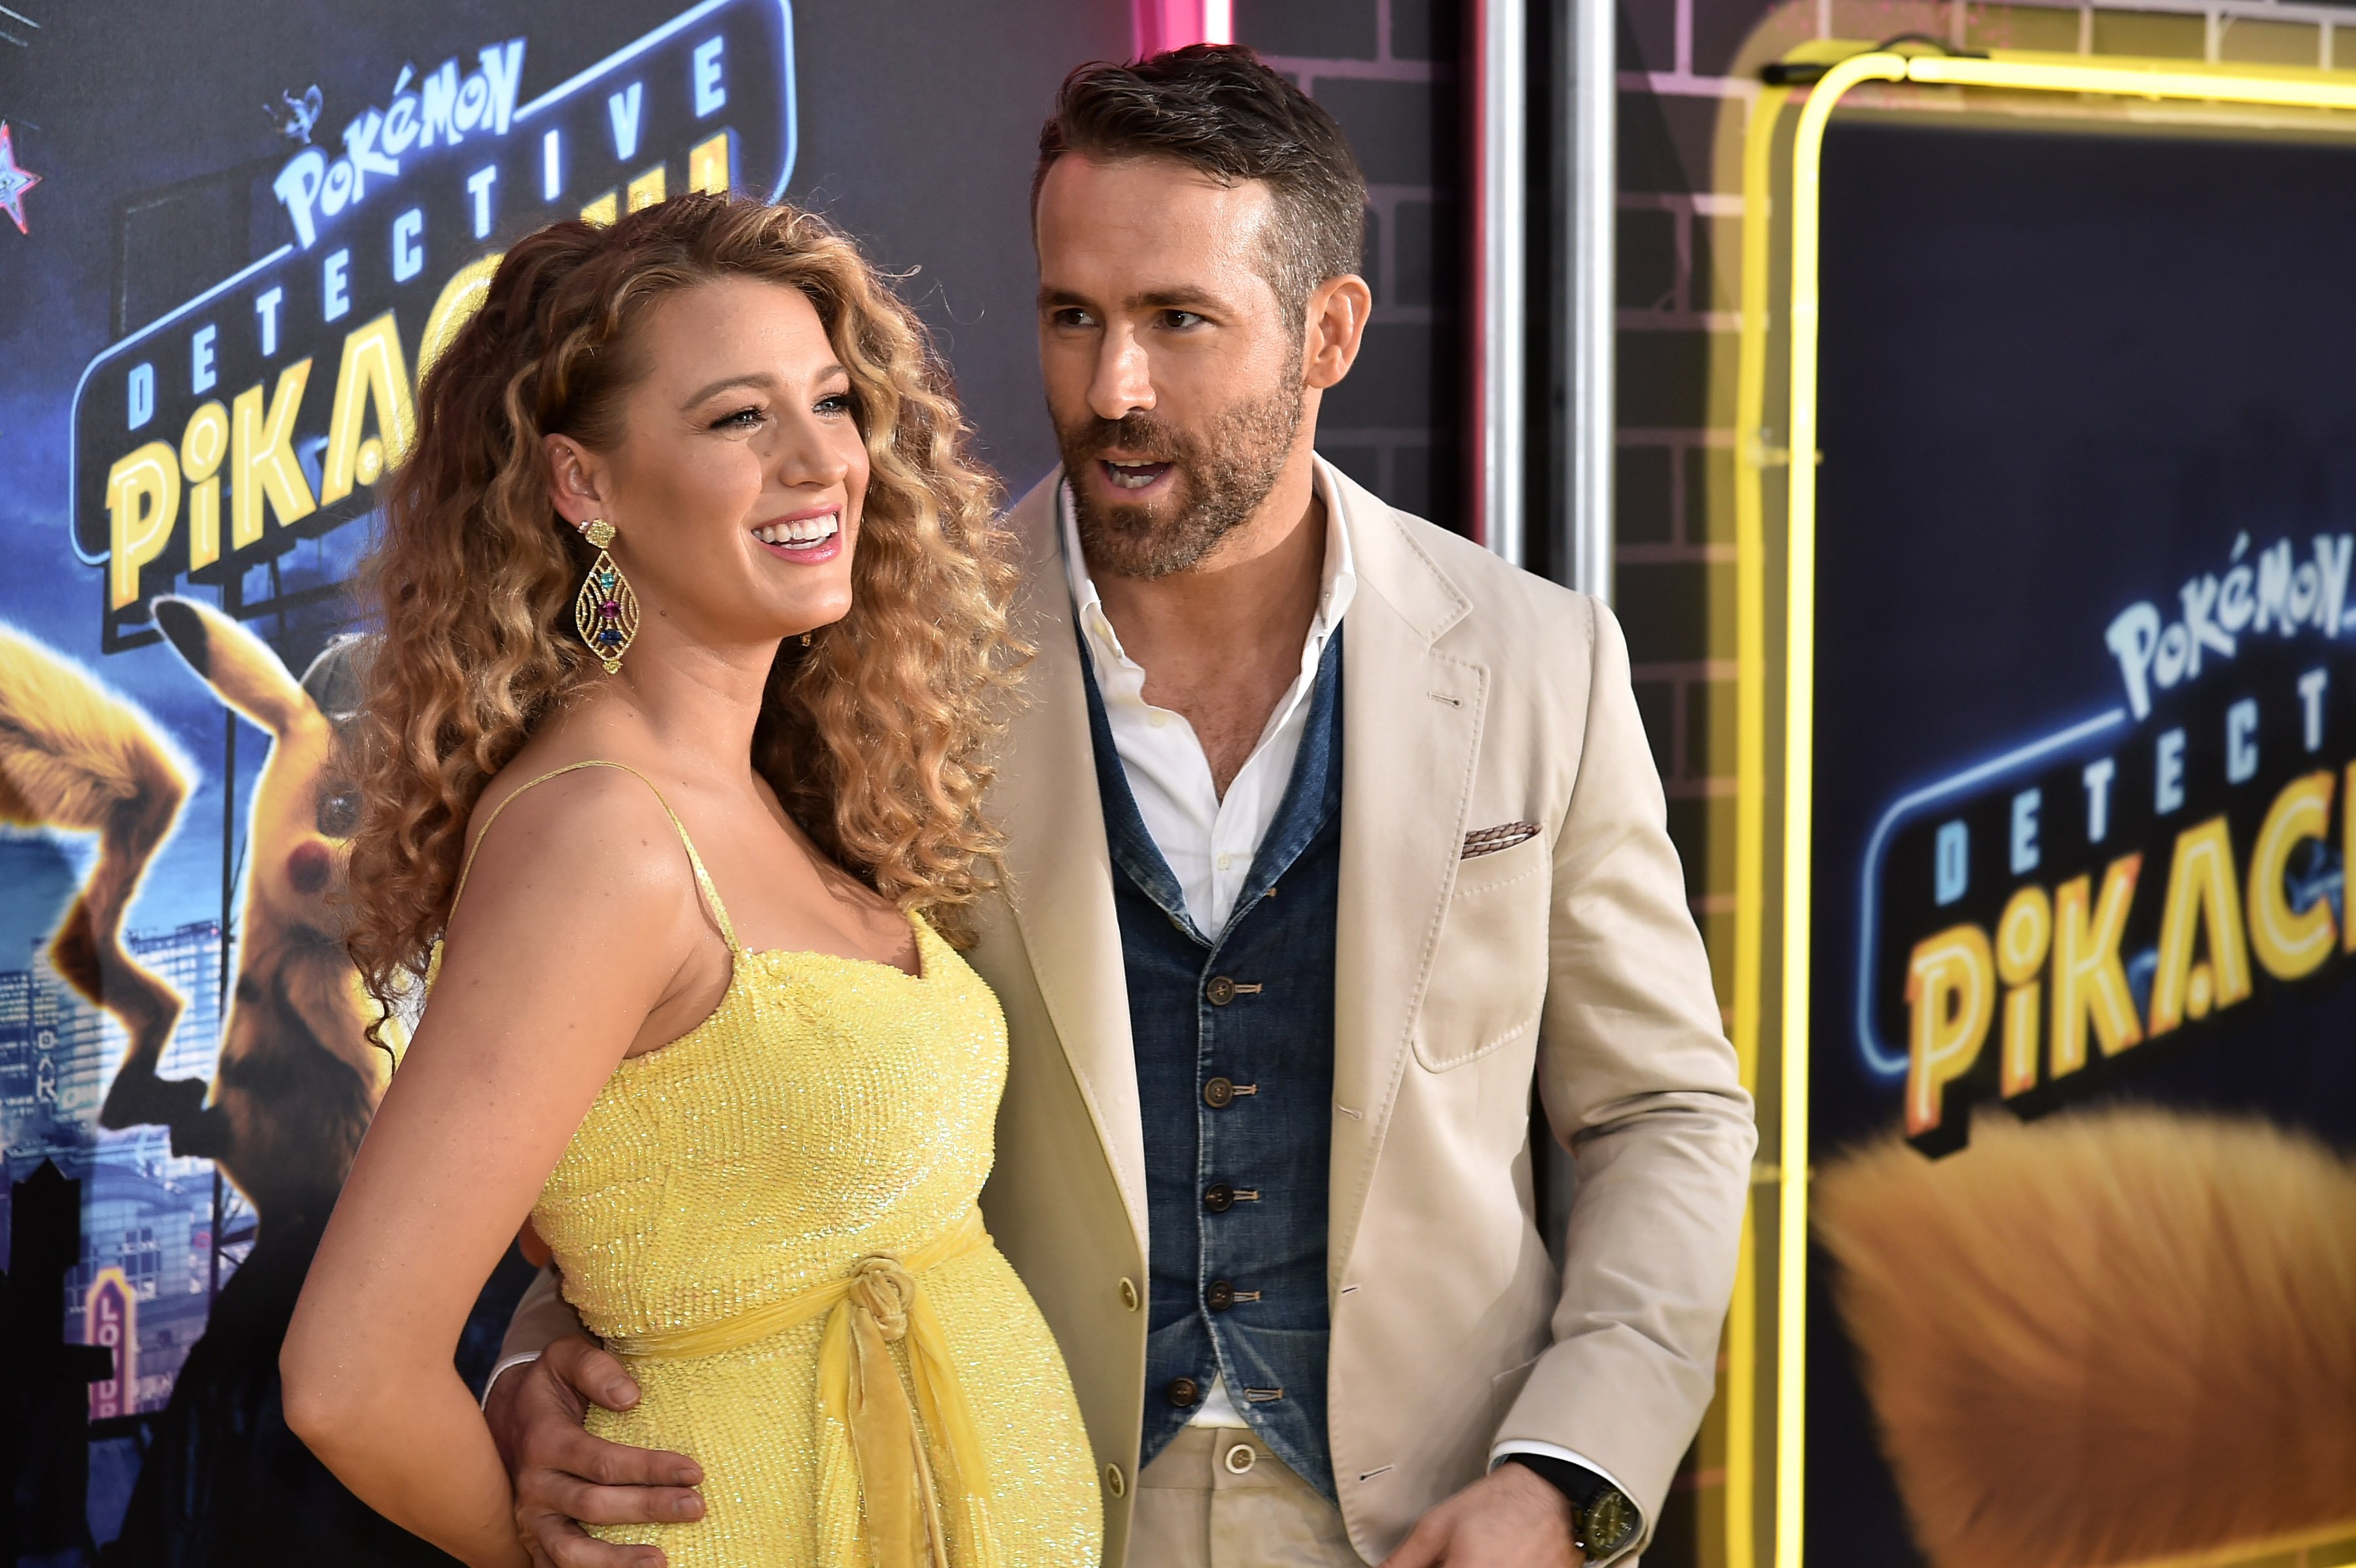 Blake Lively and Ryan Reynolds attend the premiere of "Pokemon Detective Pikachu" at Military Island in Times Square on May 2, 2019. | Photo: GettyImages